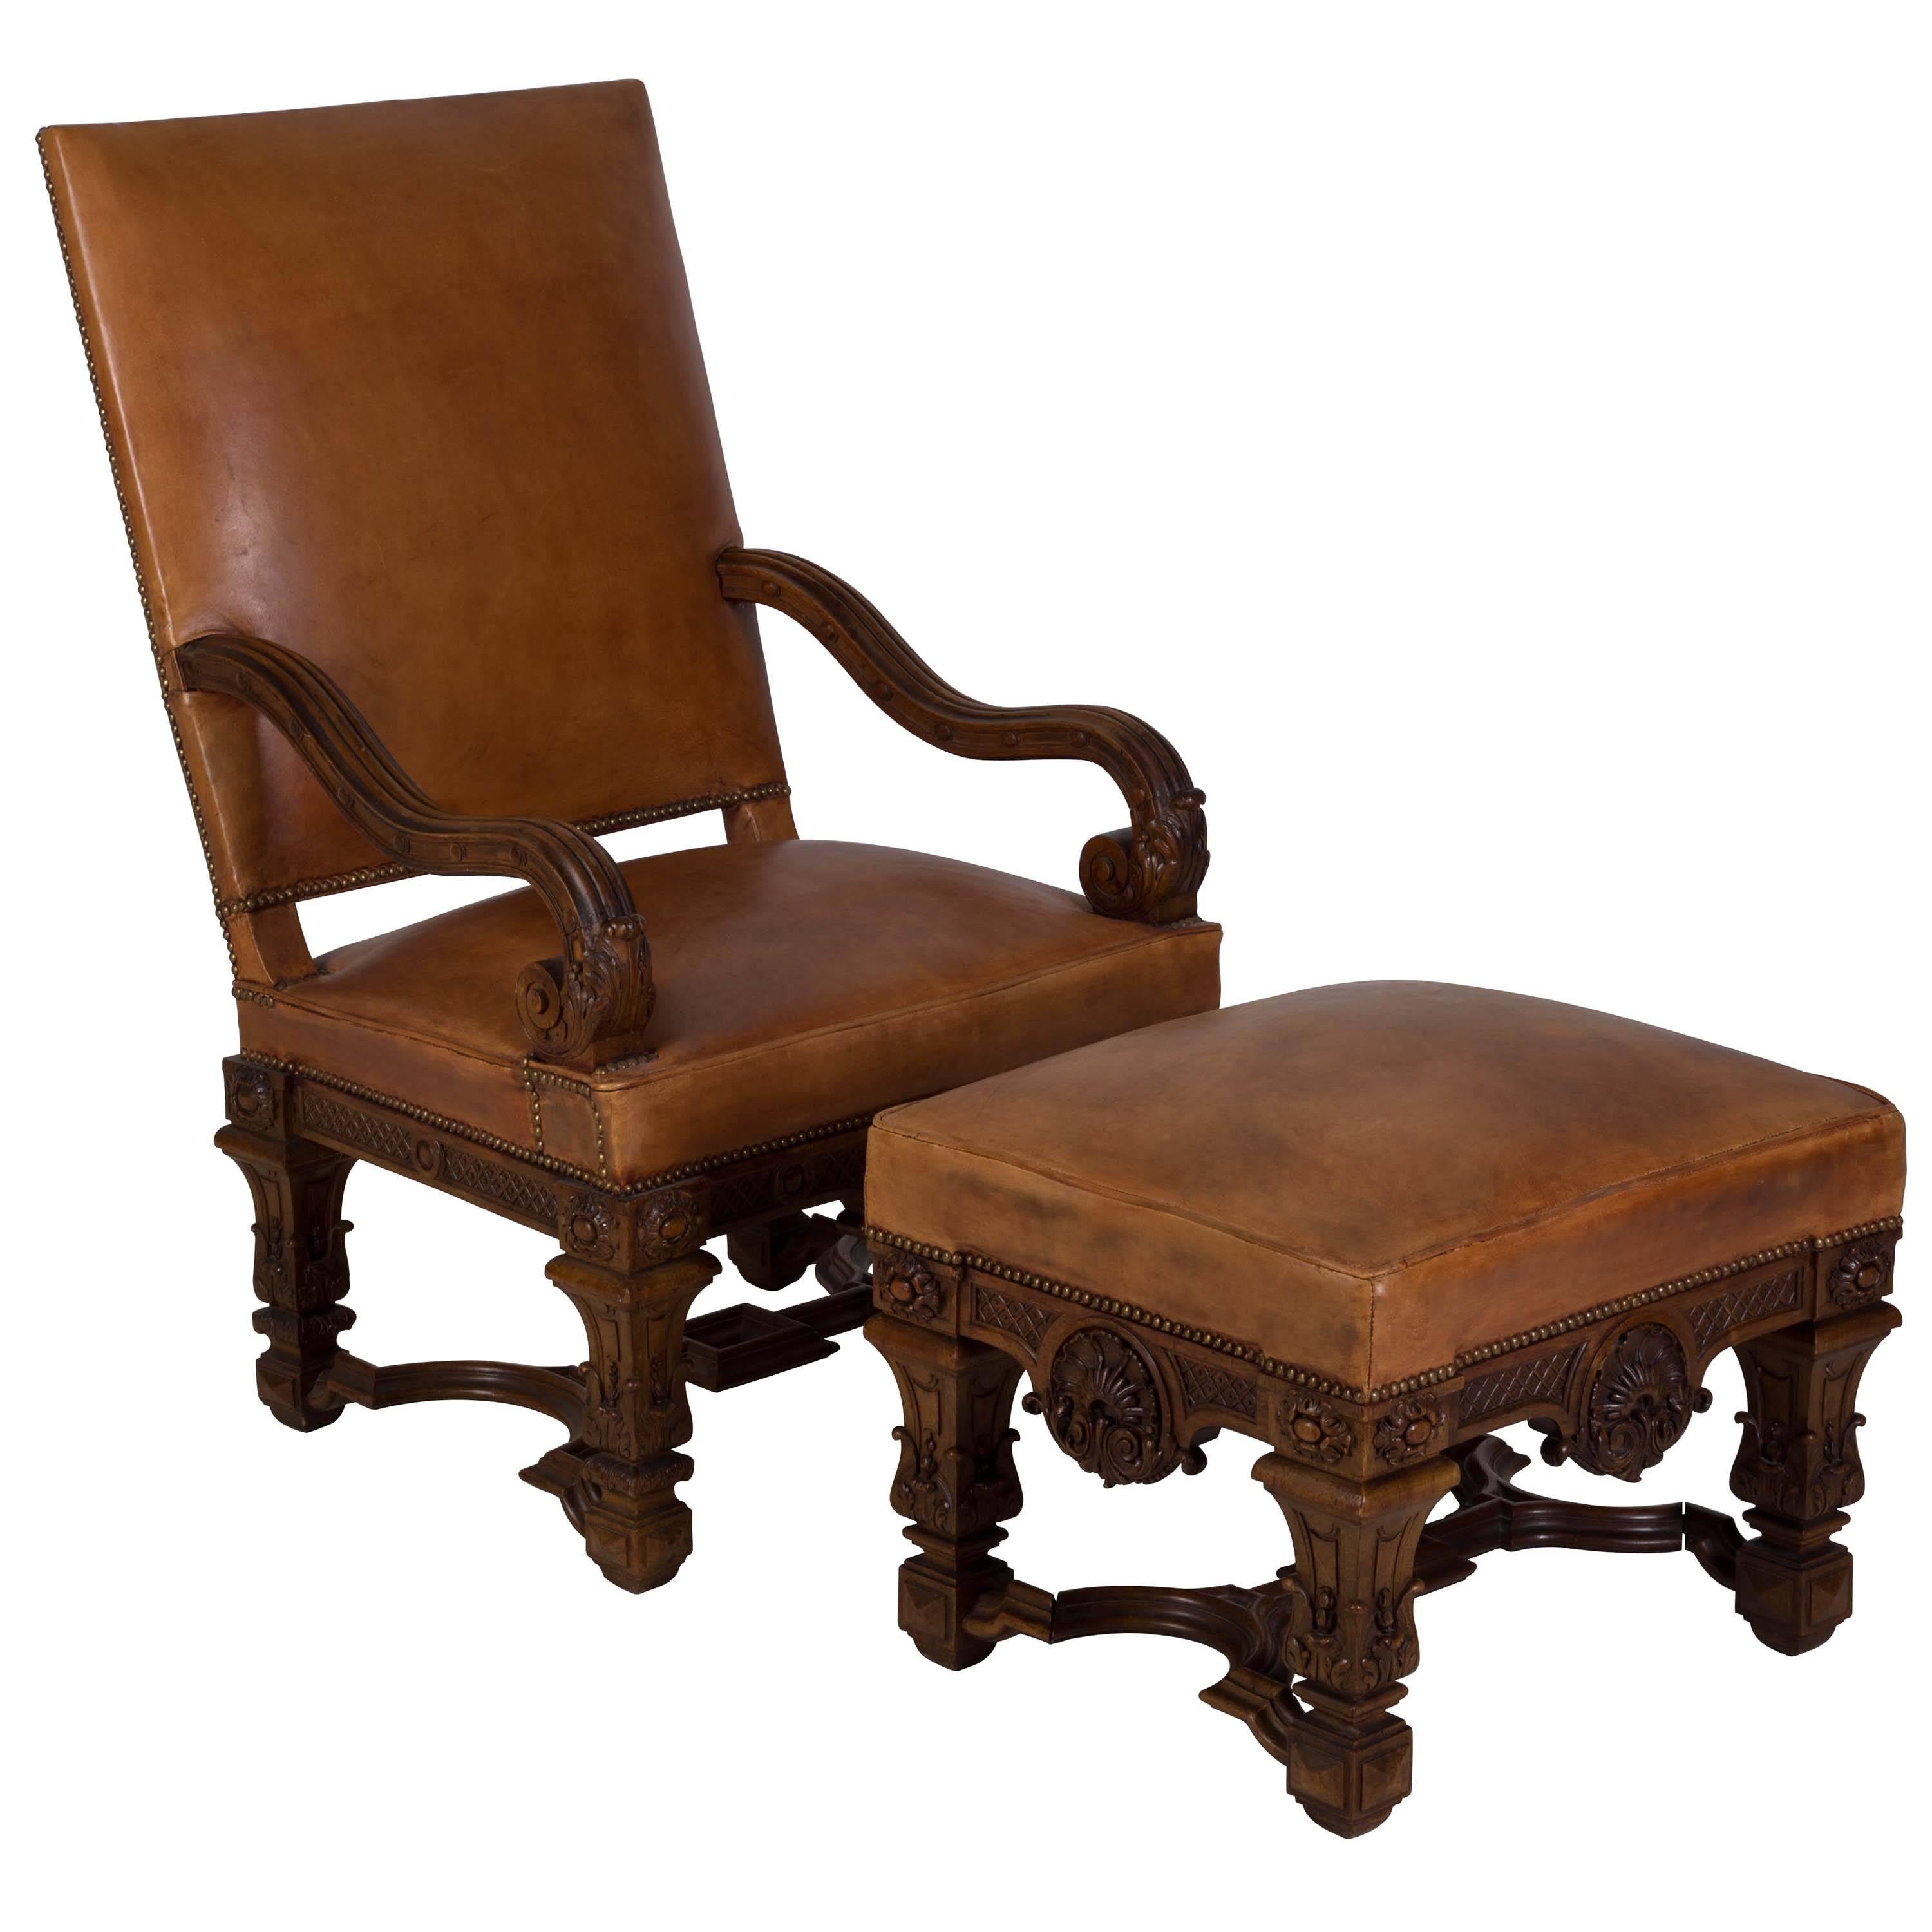 A 19th century French chair and ottoman. Very well carved with later leather upholstery. Seat height 50cm, seat depth 53.5cm.